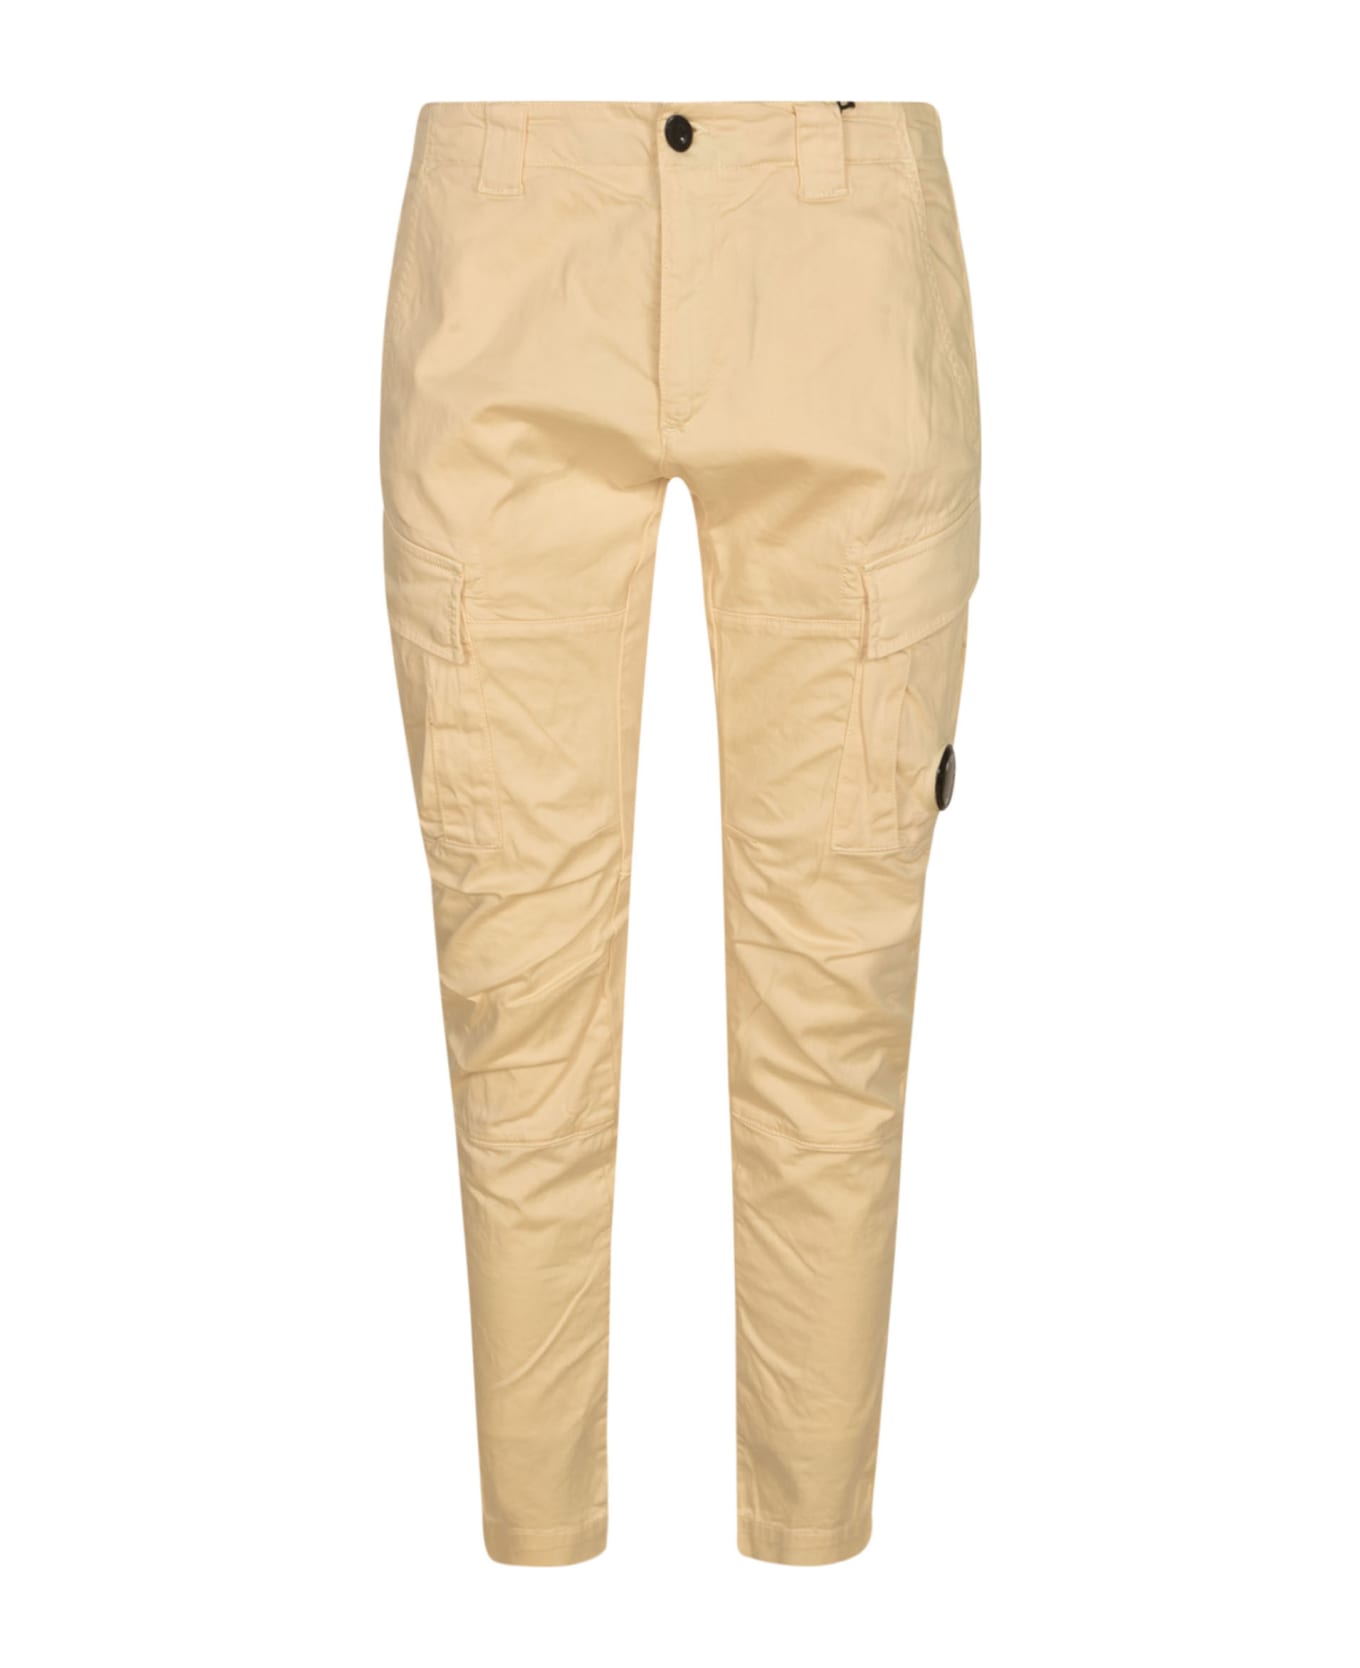 C.P. Company Cargo Buttoned Trousers - Pistacchio ボトムス